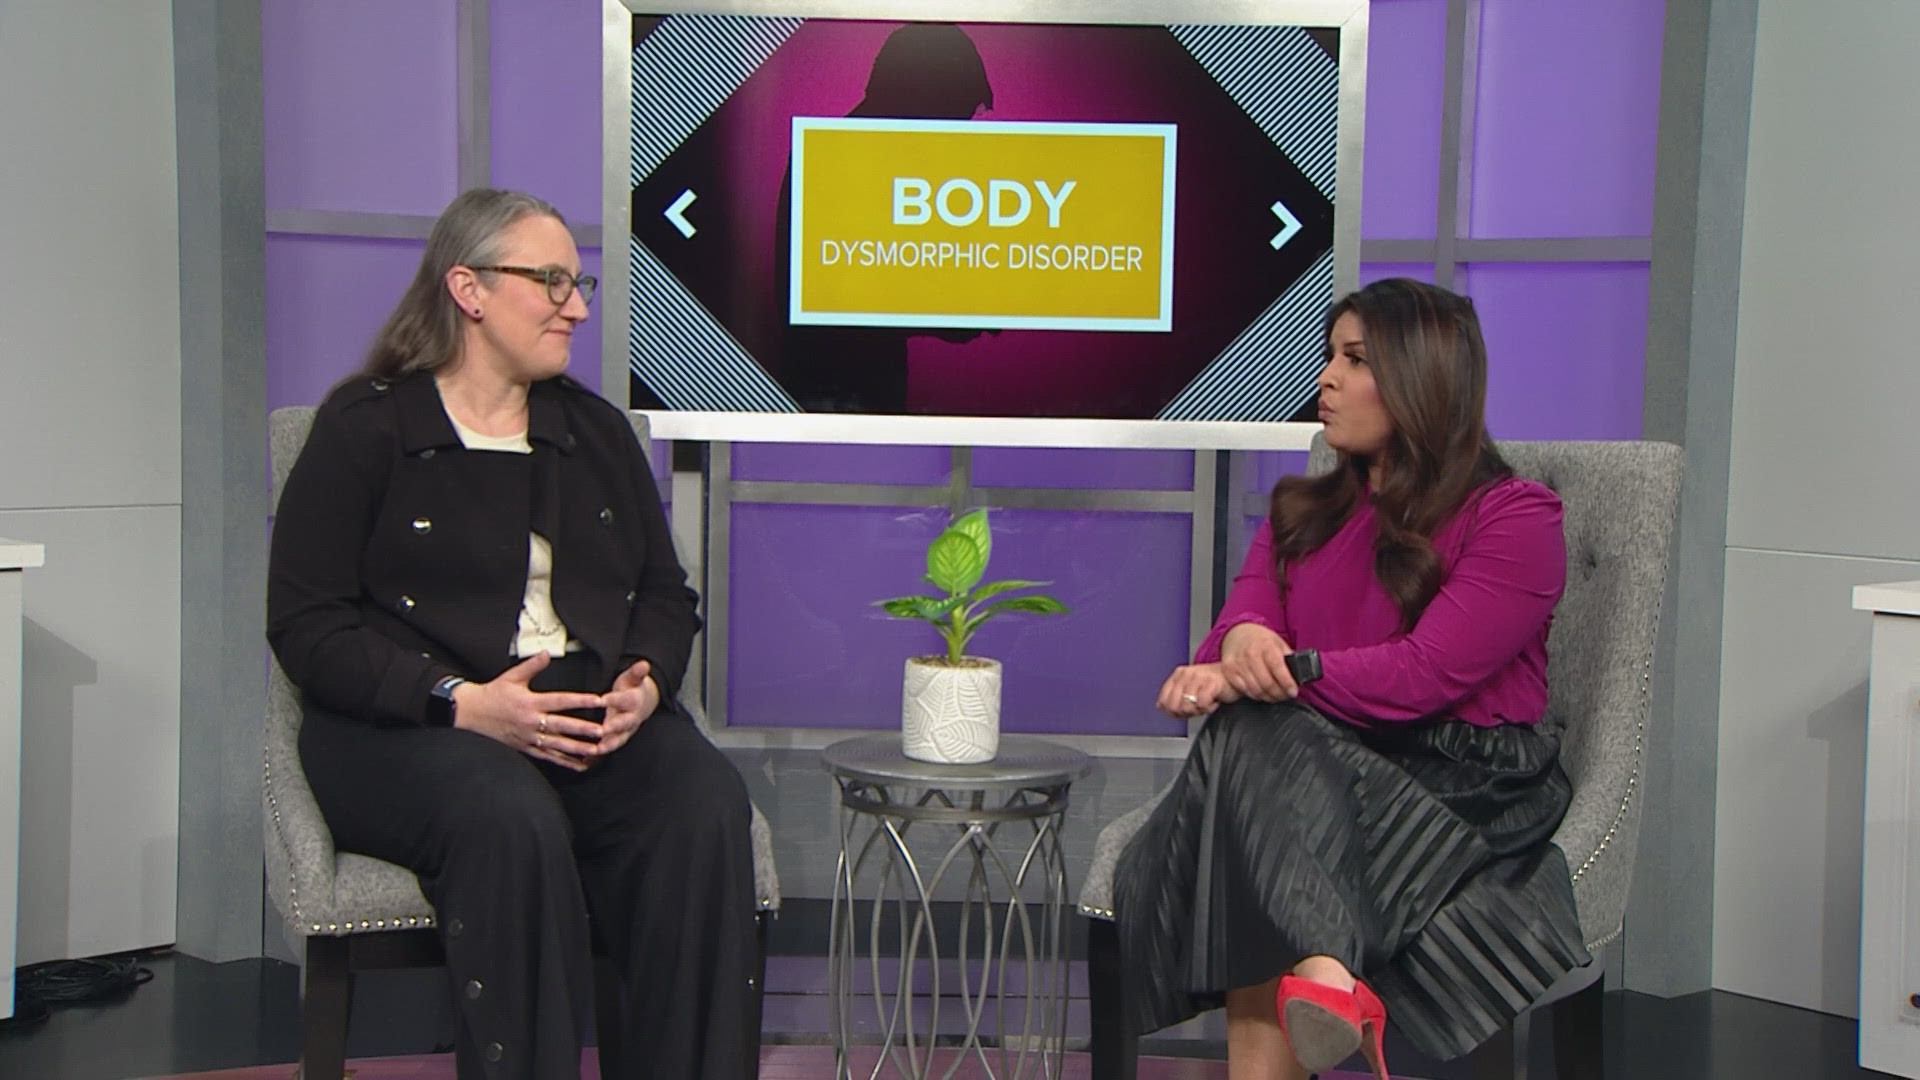 A local psychologist discusses the signs and symptoms of body dysmorphia, and share ways you can help support someone struggling with the disorder.